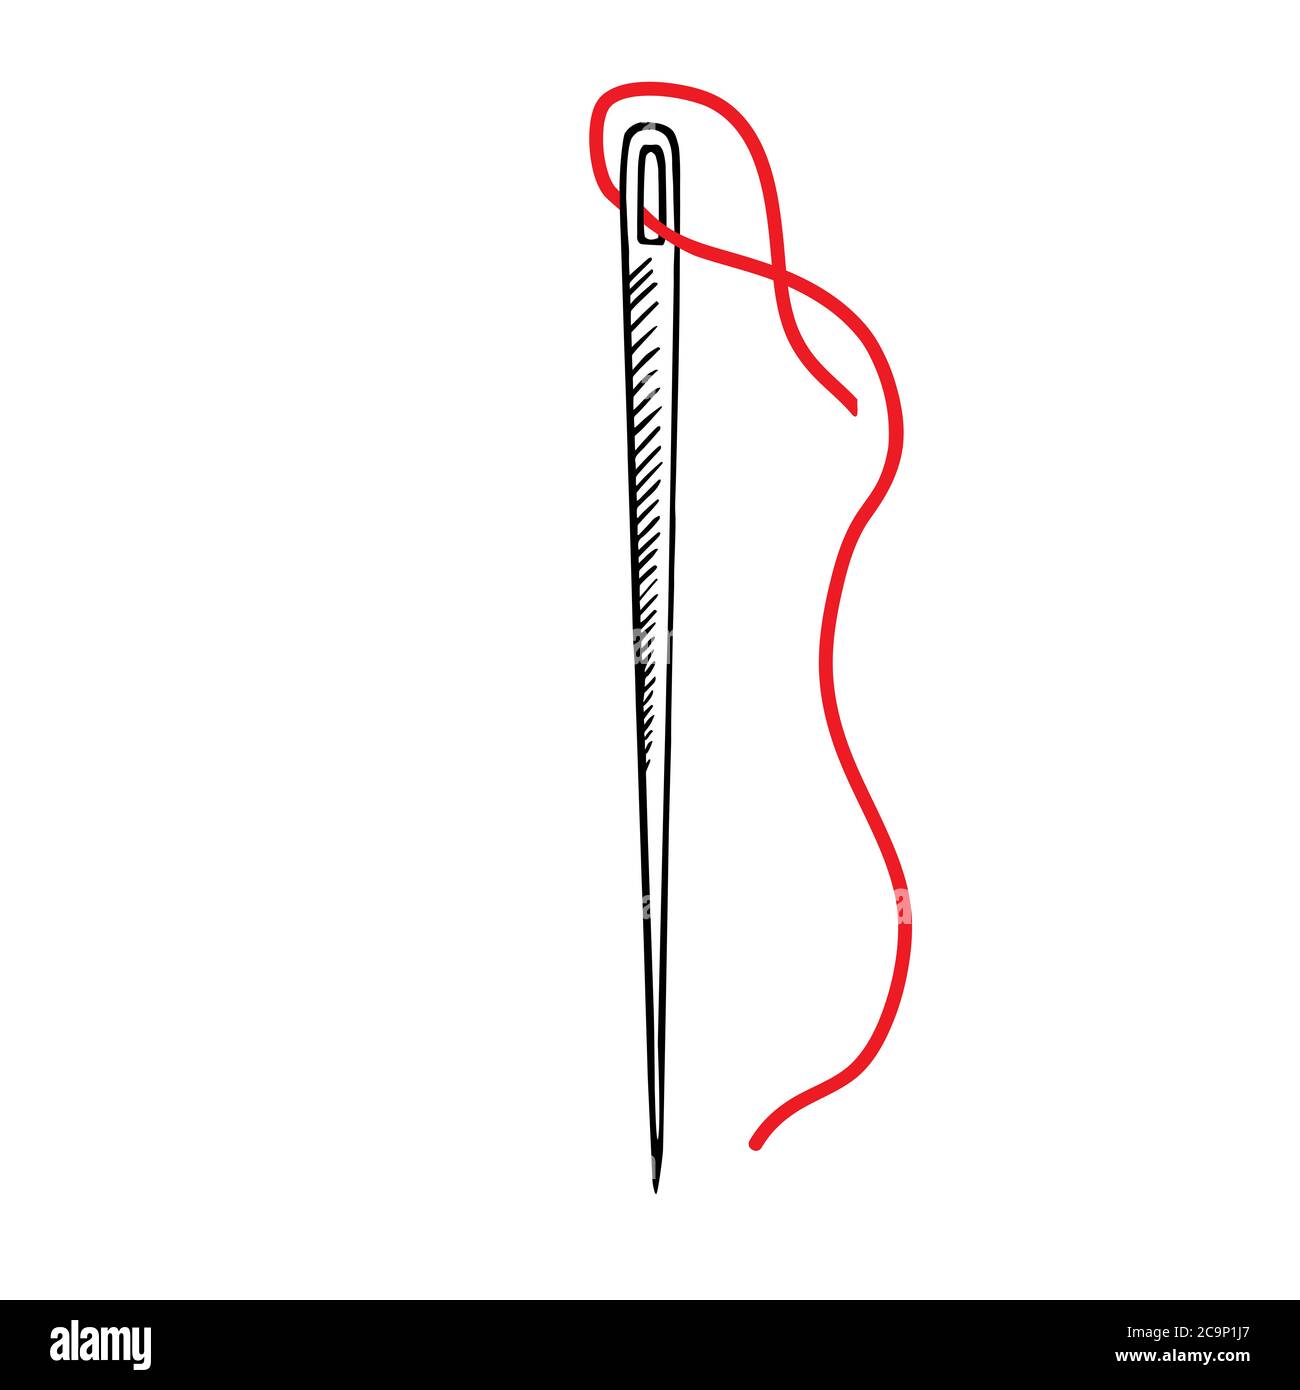 A Needle and red thread over white Stock Photo - Alamy